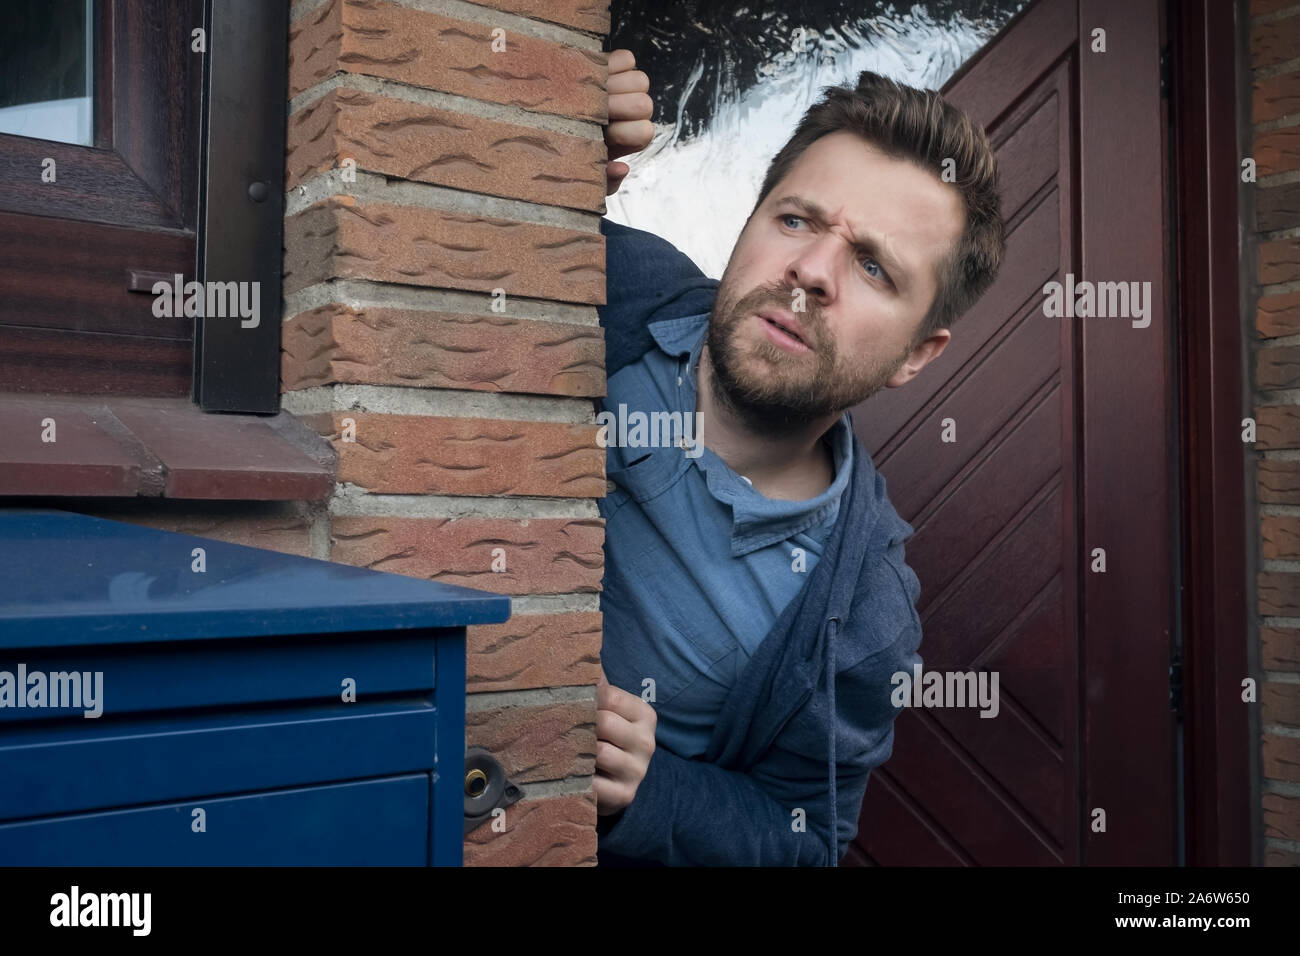 Handsome young man opening door looking on what his neighbor is doing suspecting something. Stock Photo